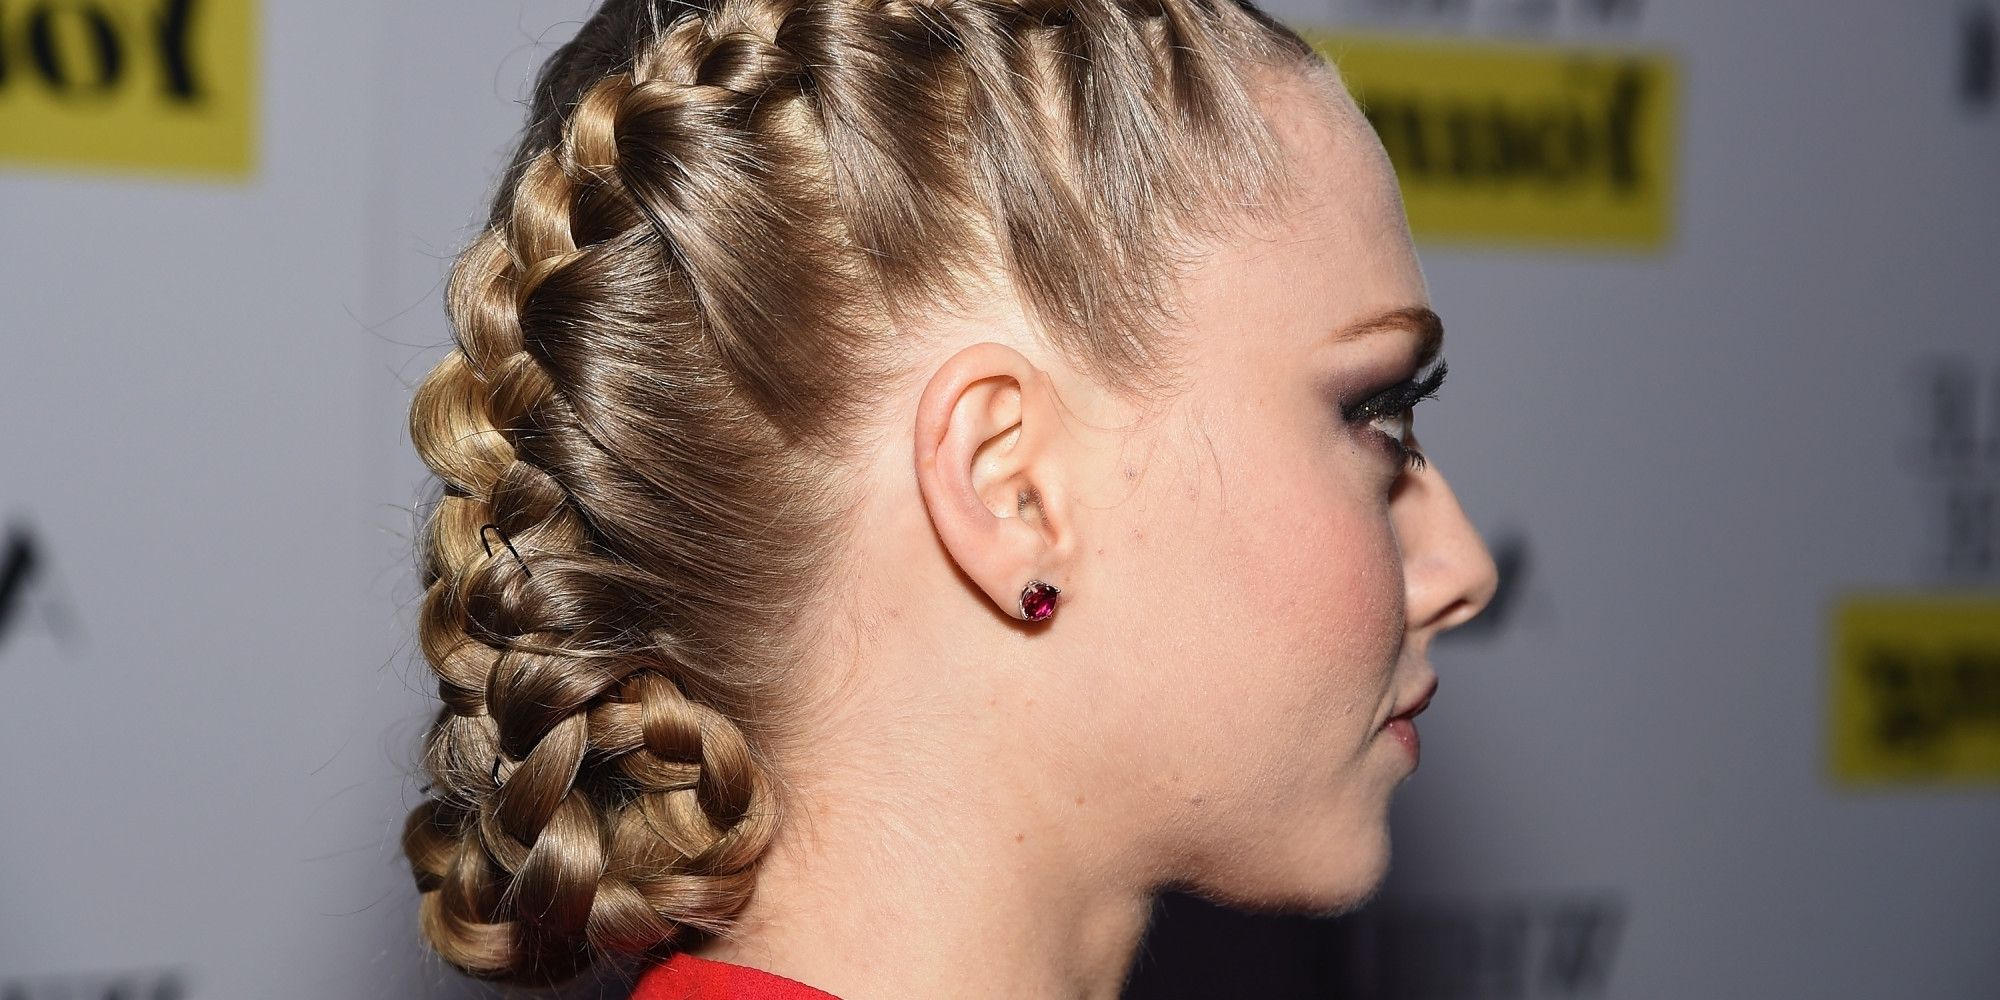 2018 Fiercely Braided Hairstyles With Hair Styles : Recreate Amanda Seyfrieds Fierce French Braid In  (View 6 of 15)